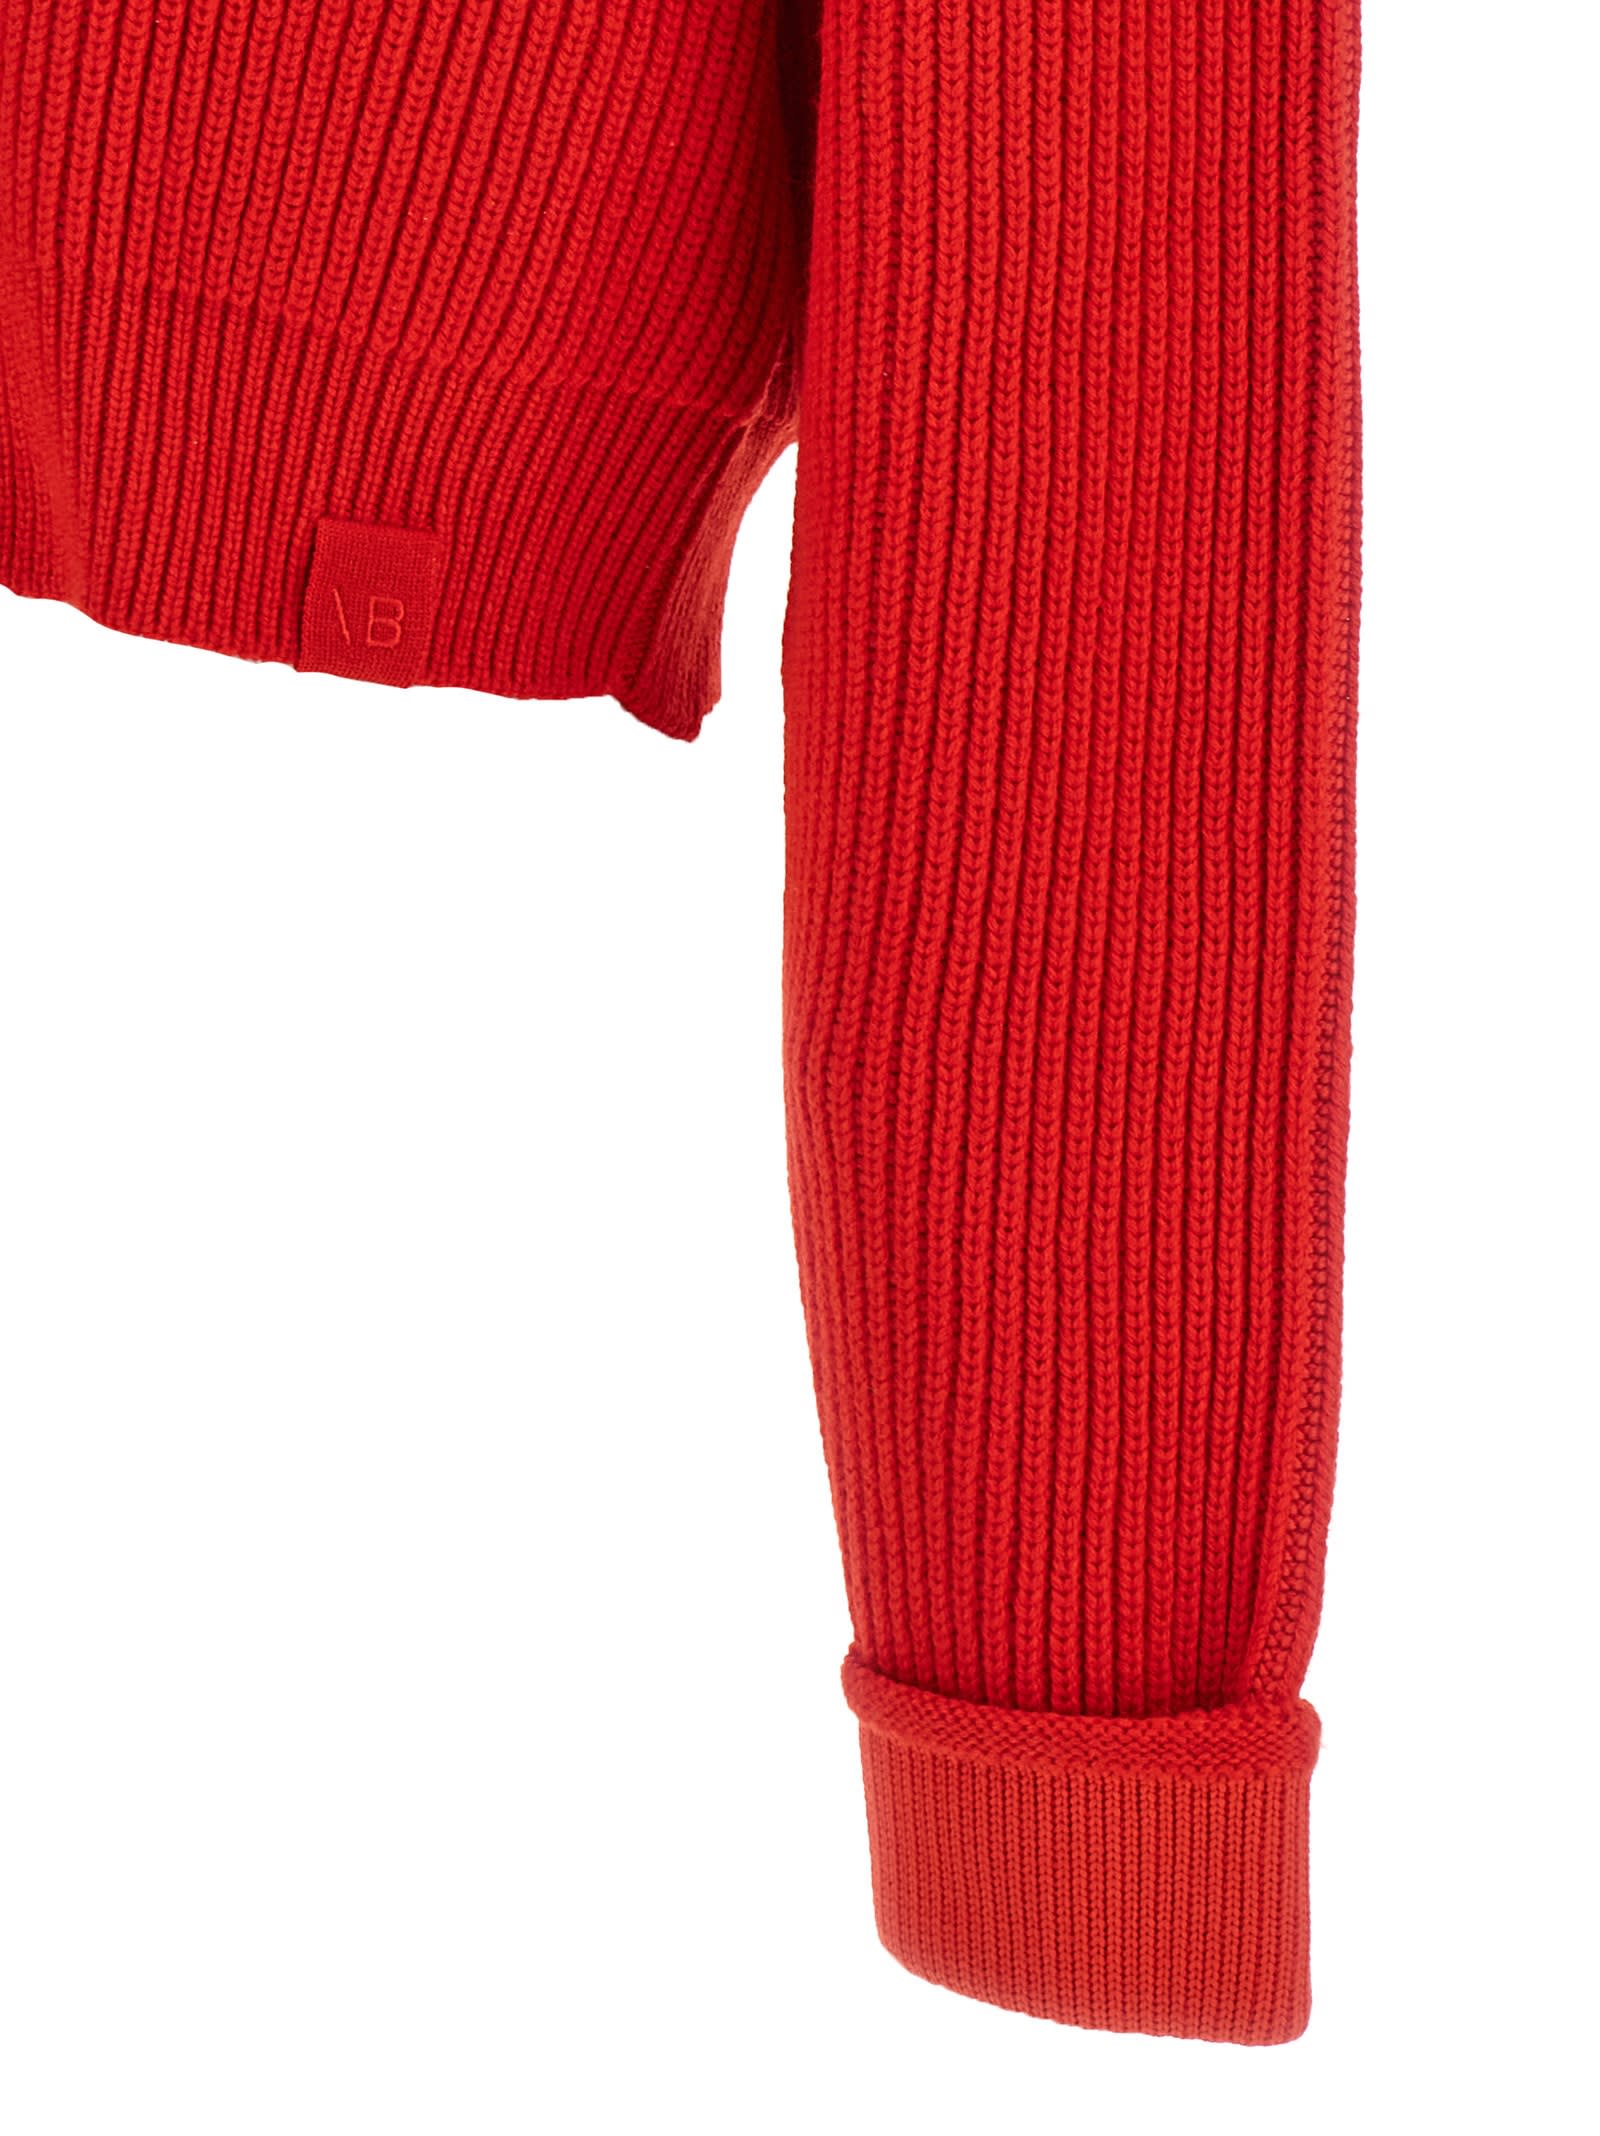 Shop Victoria Beckham Cropped Cardigan In Red